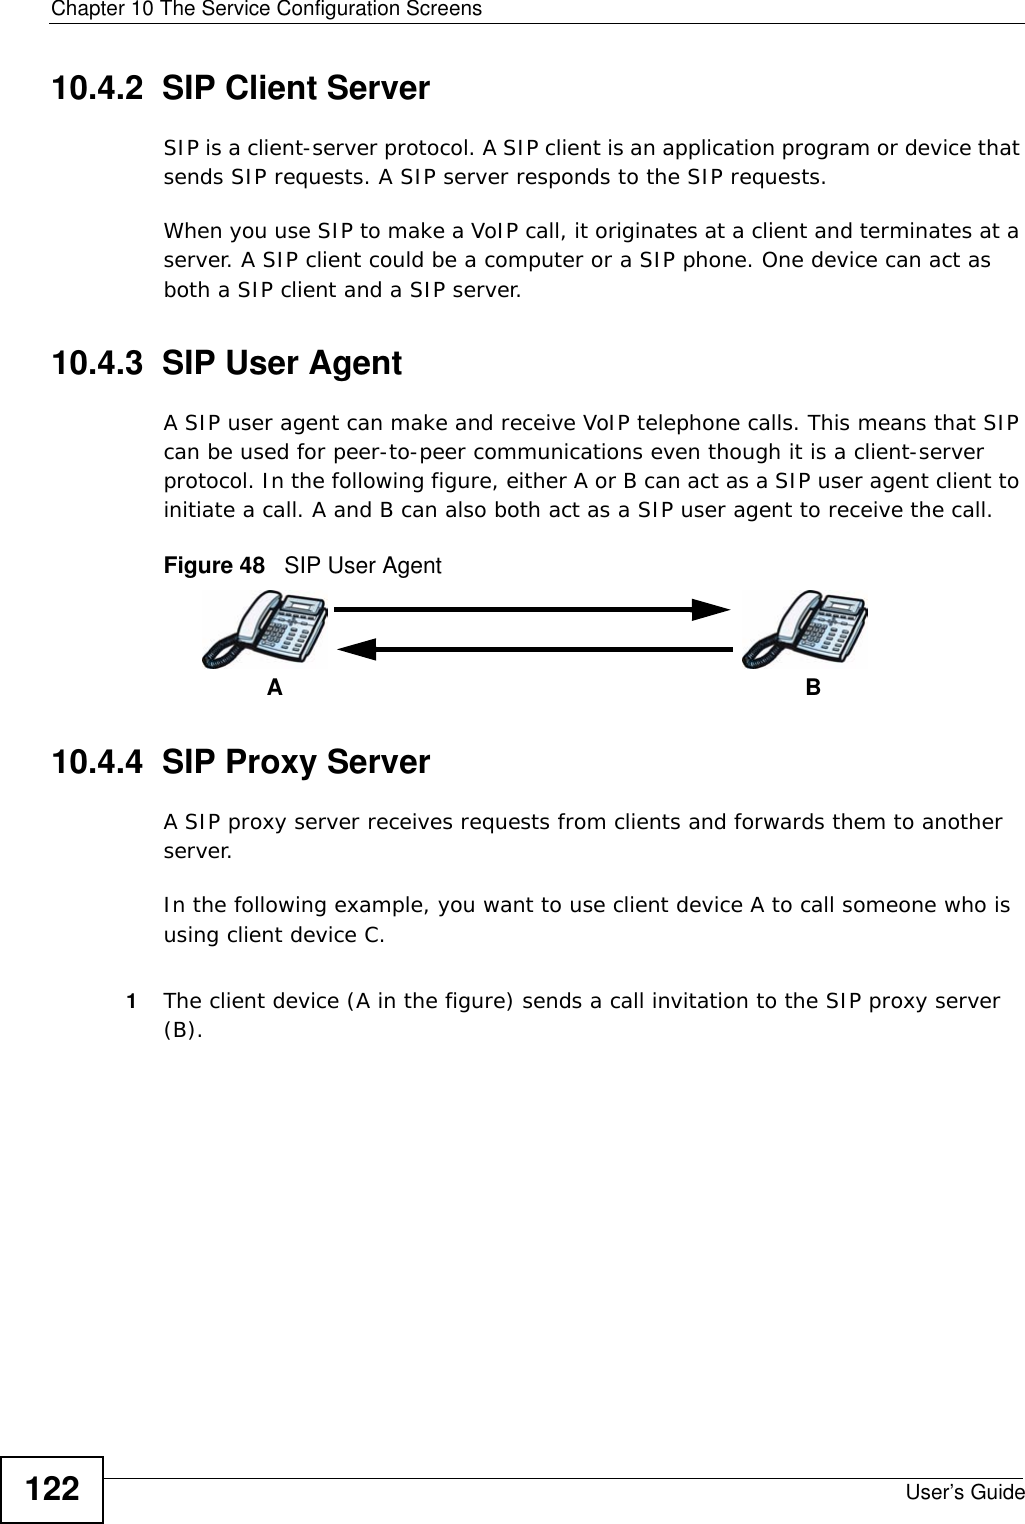 Chapter 10 The Service Configuration ScreensUser’s Guide12210.4.2  SIP Client ServerSIP is a client-server protocol. A SIP client is an application program or device that sends SIP requests. A SIP server responds to the SIP requests. When you use SIP to make a VoIP call, it originates at a client and terminates at a server. A SIP client could be a computer or a SIP phone. One device can act as both a SIP client and a SIP server. 10.4.3  SIP User Agent A SIP user agent can make and receive VoIP telephone calls. This means that SIP can be used for peer-to-peer communications even though it is a client-server protocol. In the following figure, either A or B can act as a SIP user agent client to initiate a call. A and B can also both act as a SIP user agent to receive the call.Figure 48   SIP User Agent10.4.4  SIP Proxy ServerA SIP proxy server receives requests from clients and forwards them to another server.In the following example, you want to use client device A to call someone who is using client device C. 1The client device (A in the figure) sends a call invitation to the SIP proxy server (B).AB